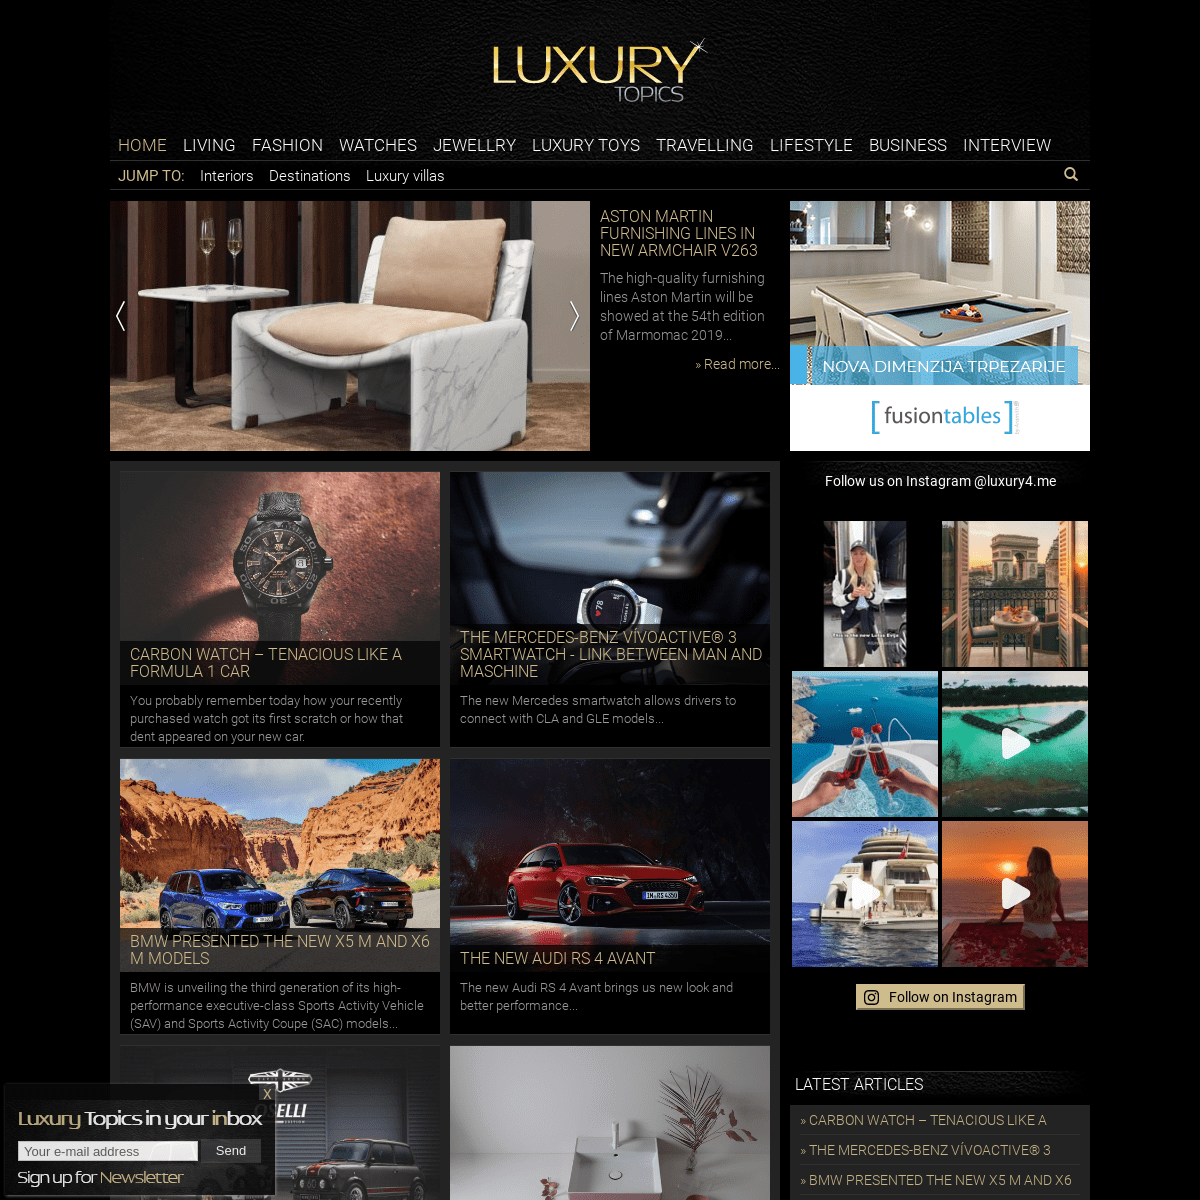 A complete backup of luxurytopics.com